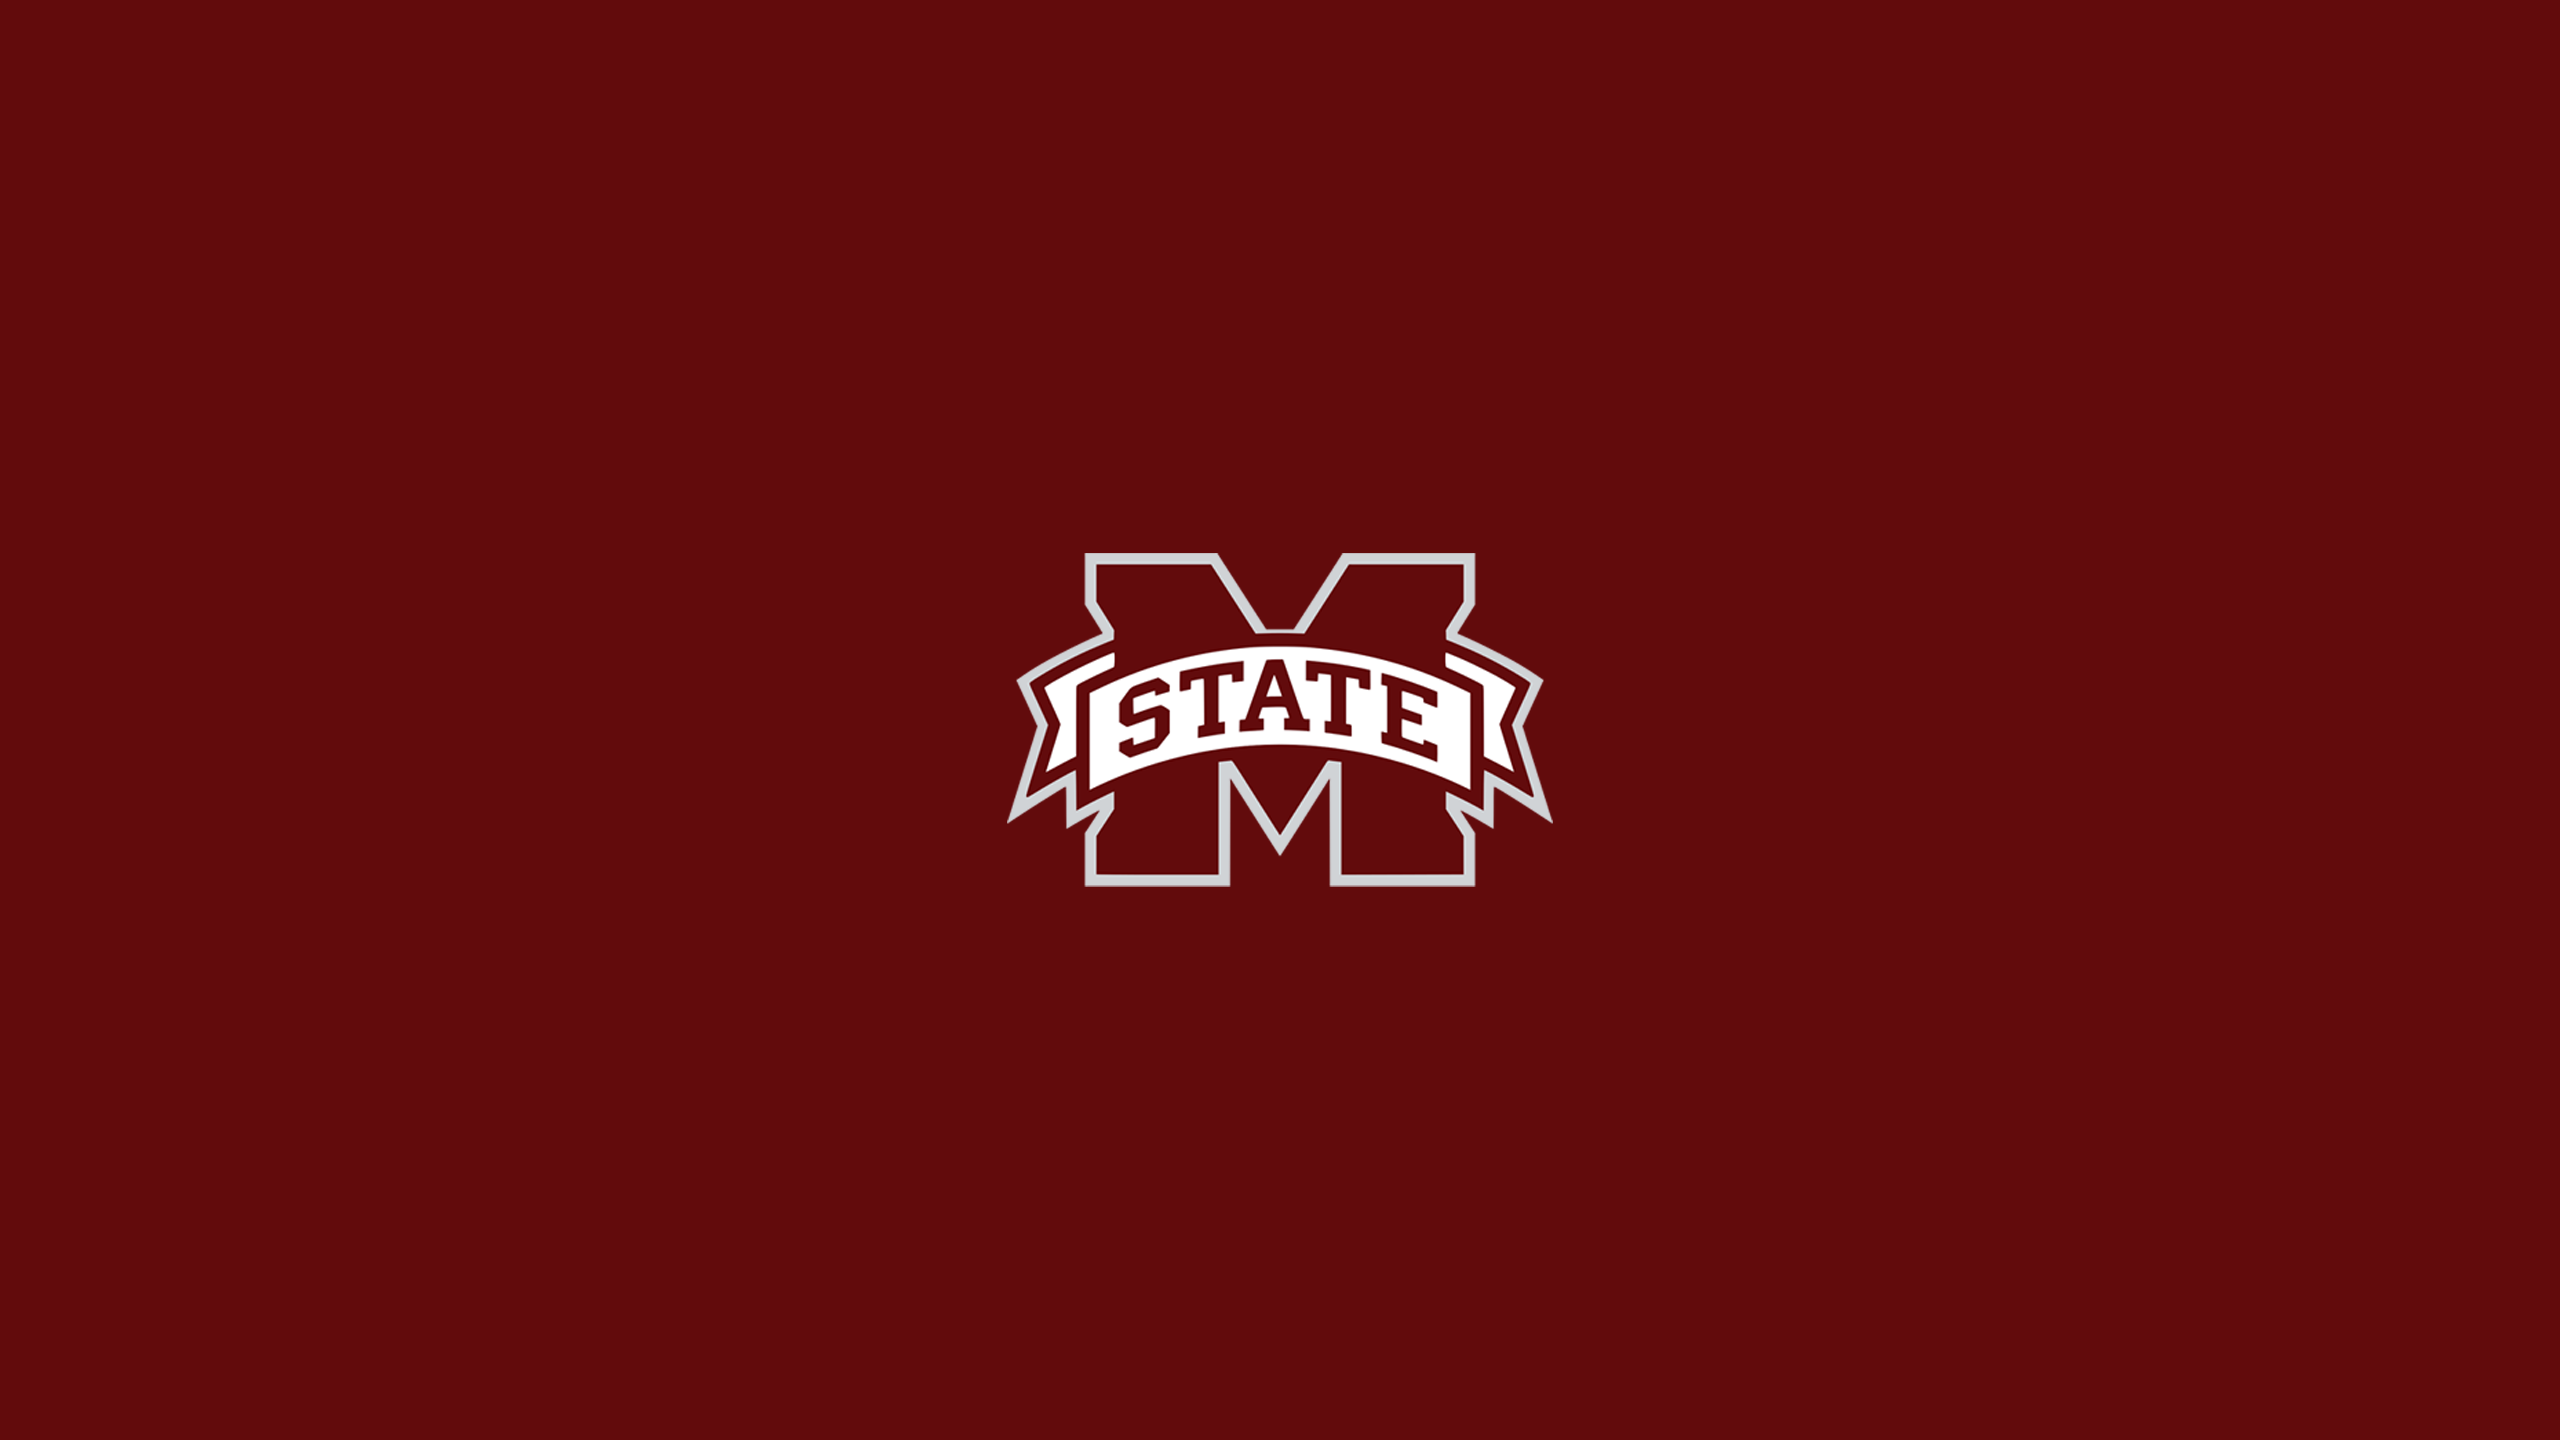 Mississippi State Bulldogs Basketball - NCAAB - Square Bettor